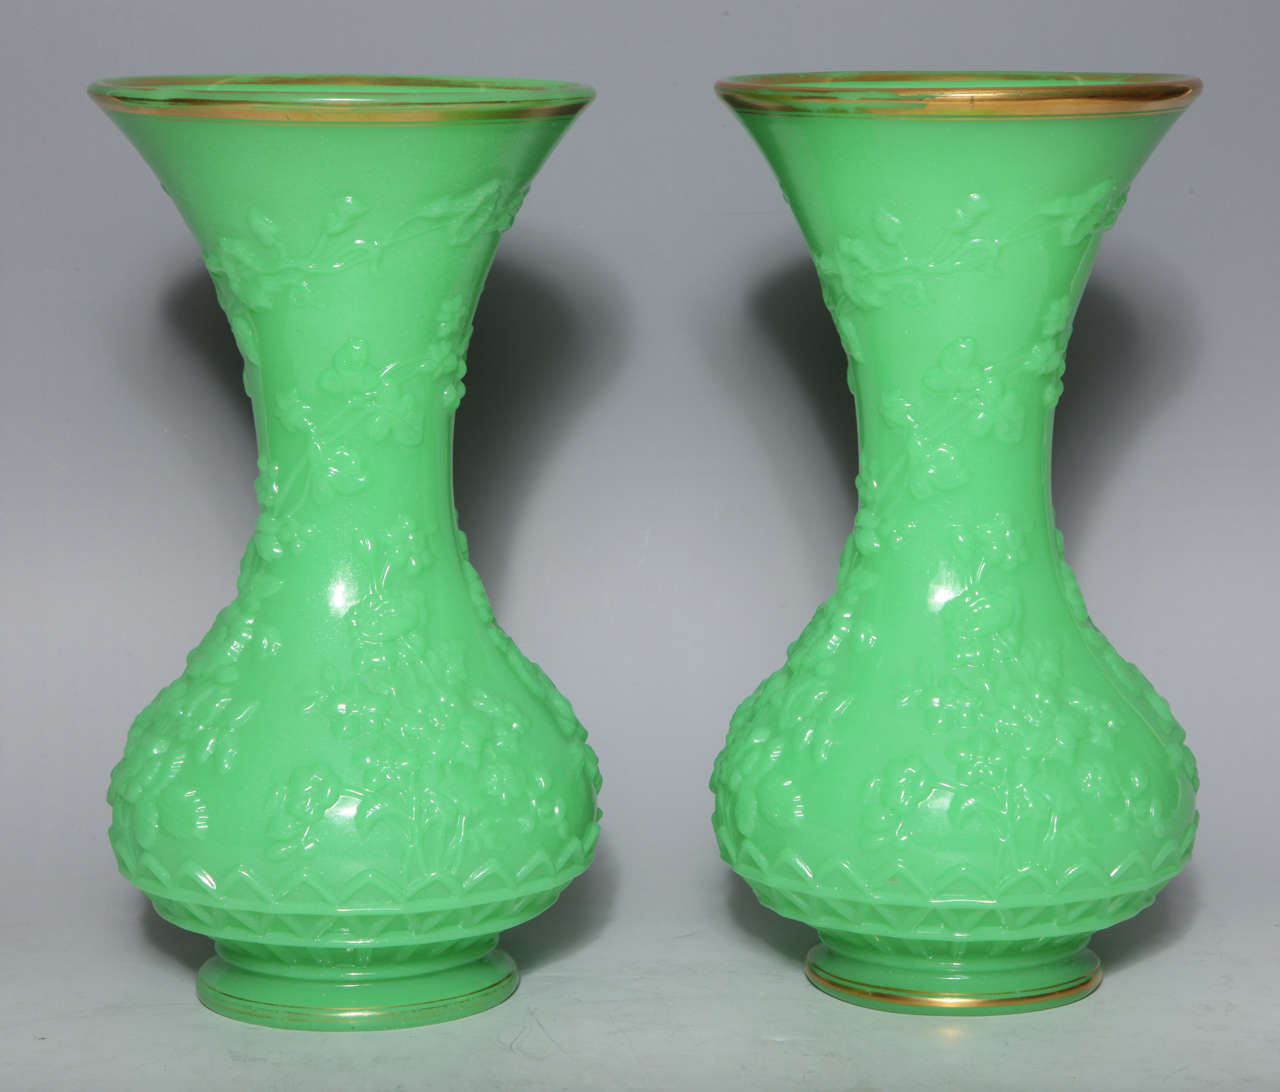 A fine pair of antique French baluster shaped green opaline glass vases, finely modeled with repose leaves and flowers,
attributed to 